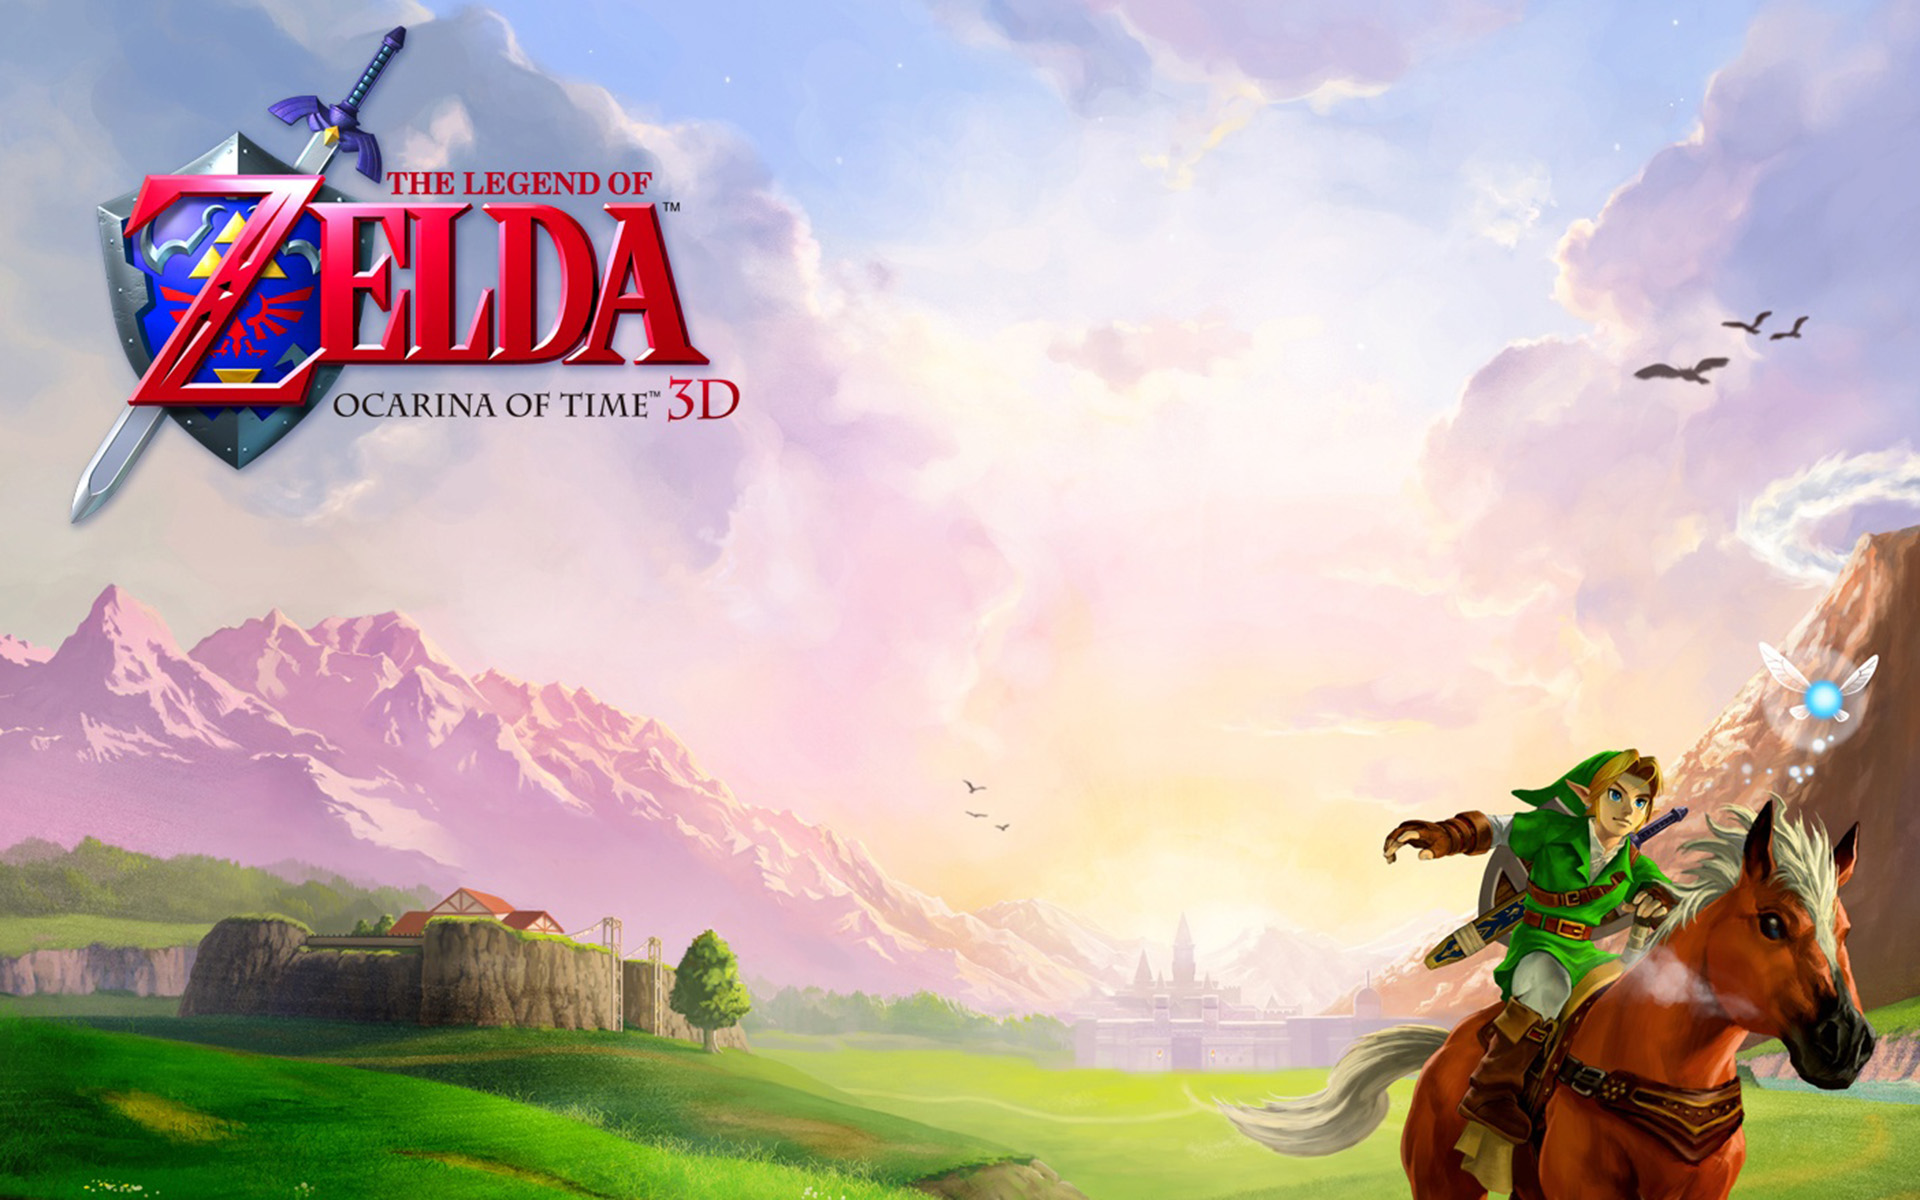 The Legend of Zelda: Ocarina of Time Wallpapers | Just Good Vibe